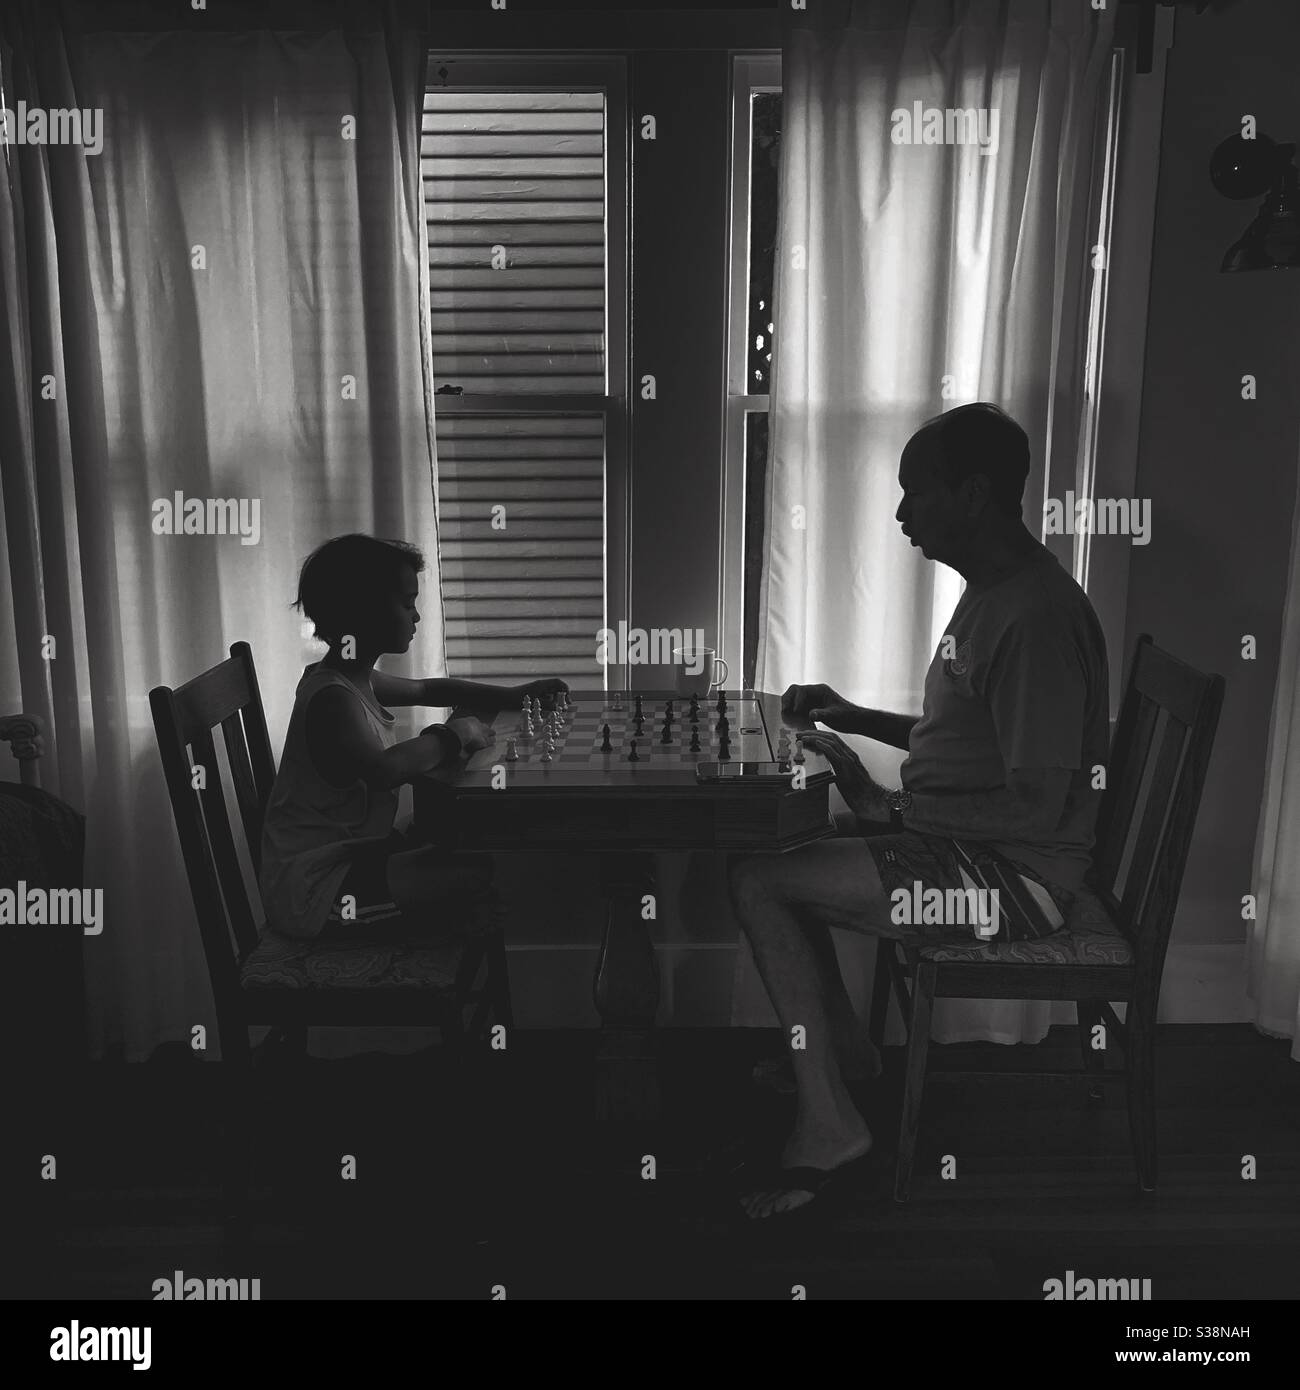 Black and white silhouette image of a man teaching a boy how to play chess. Stock Photo